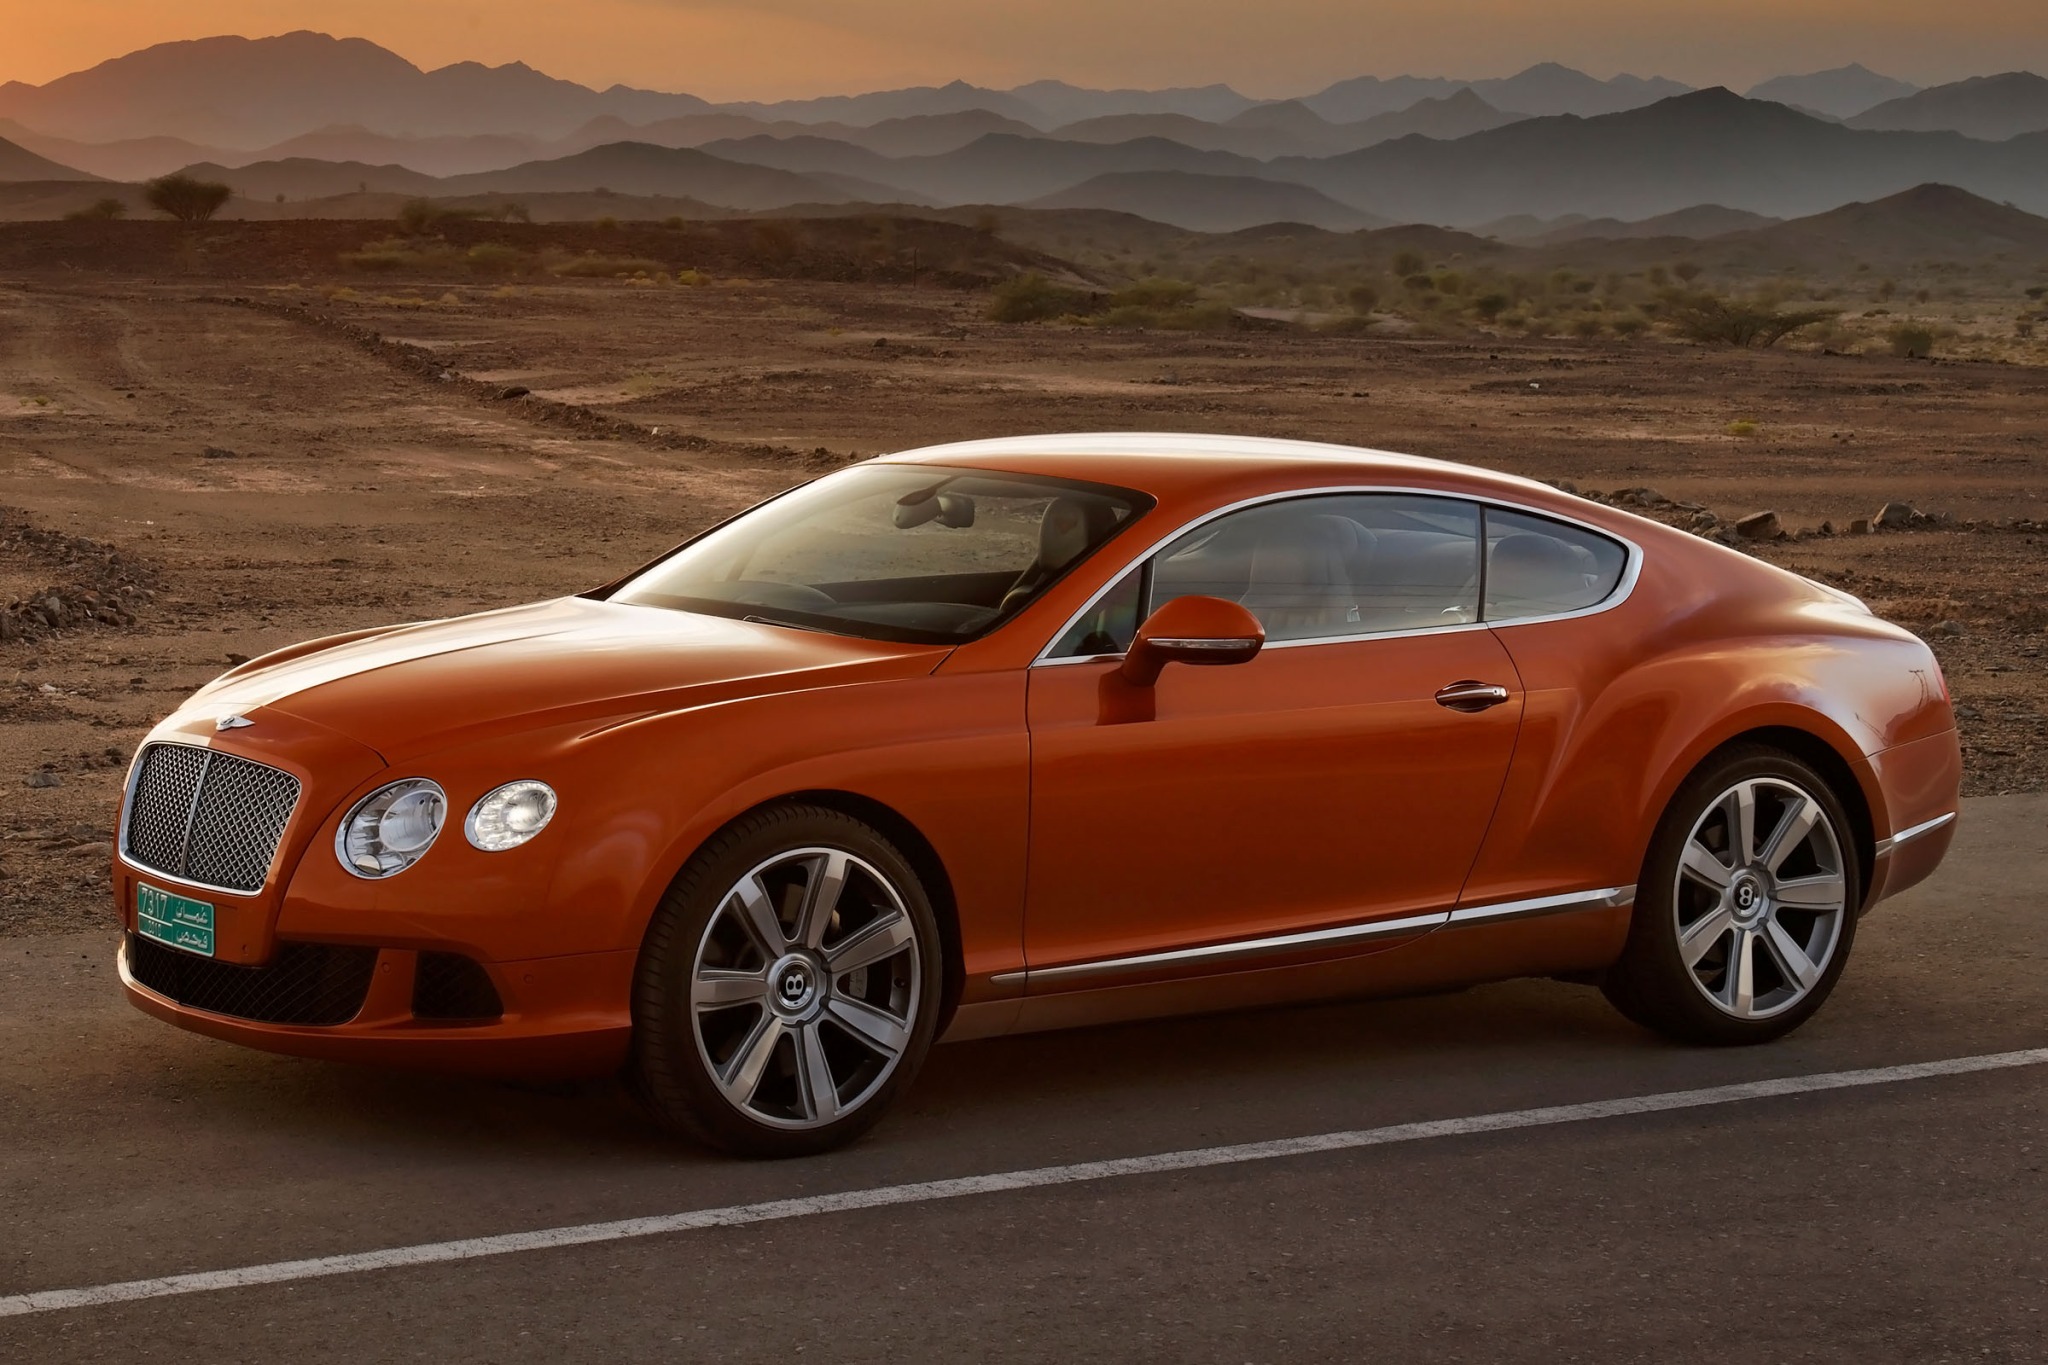 The Ultimate Luxury Driving Experience: 2012 Bentley Continental GT Speed